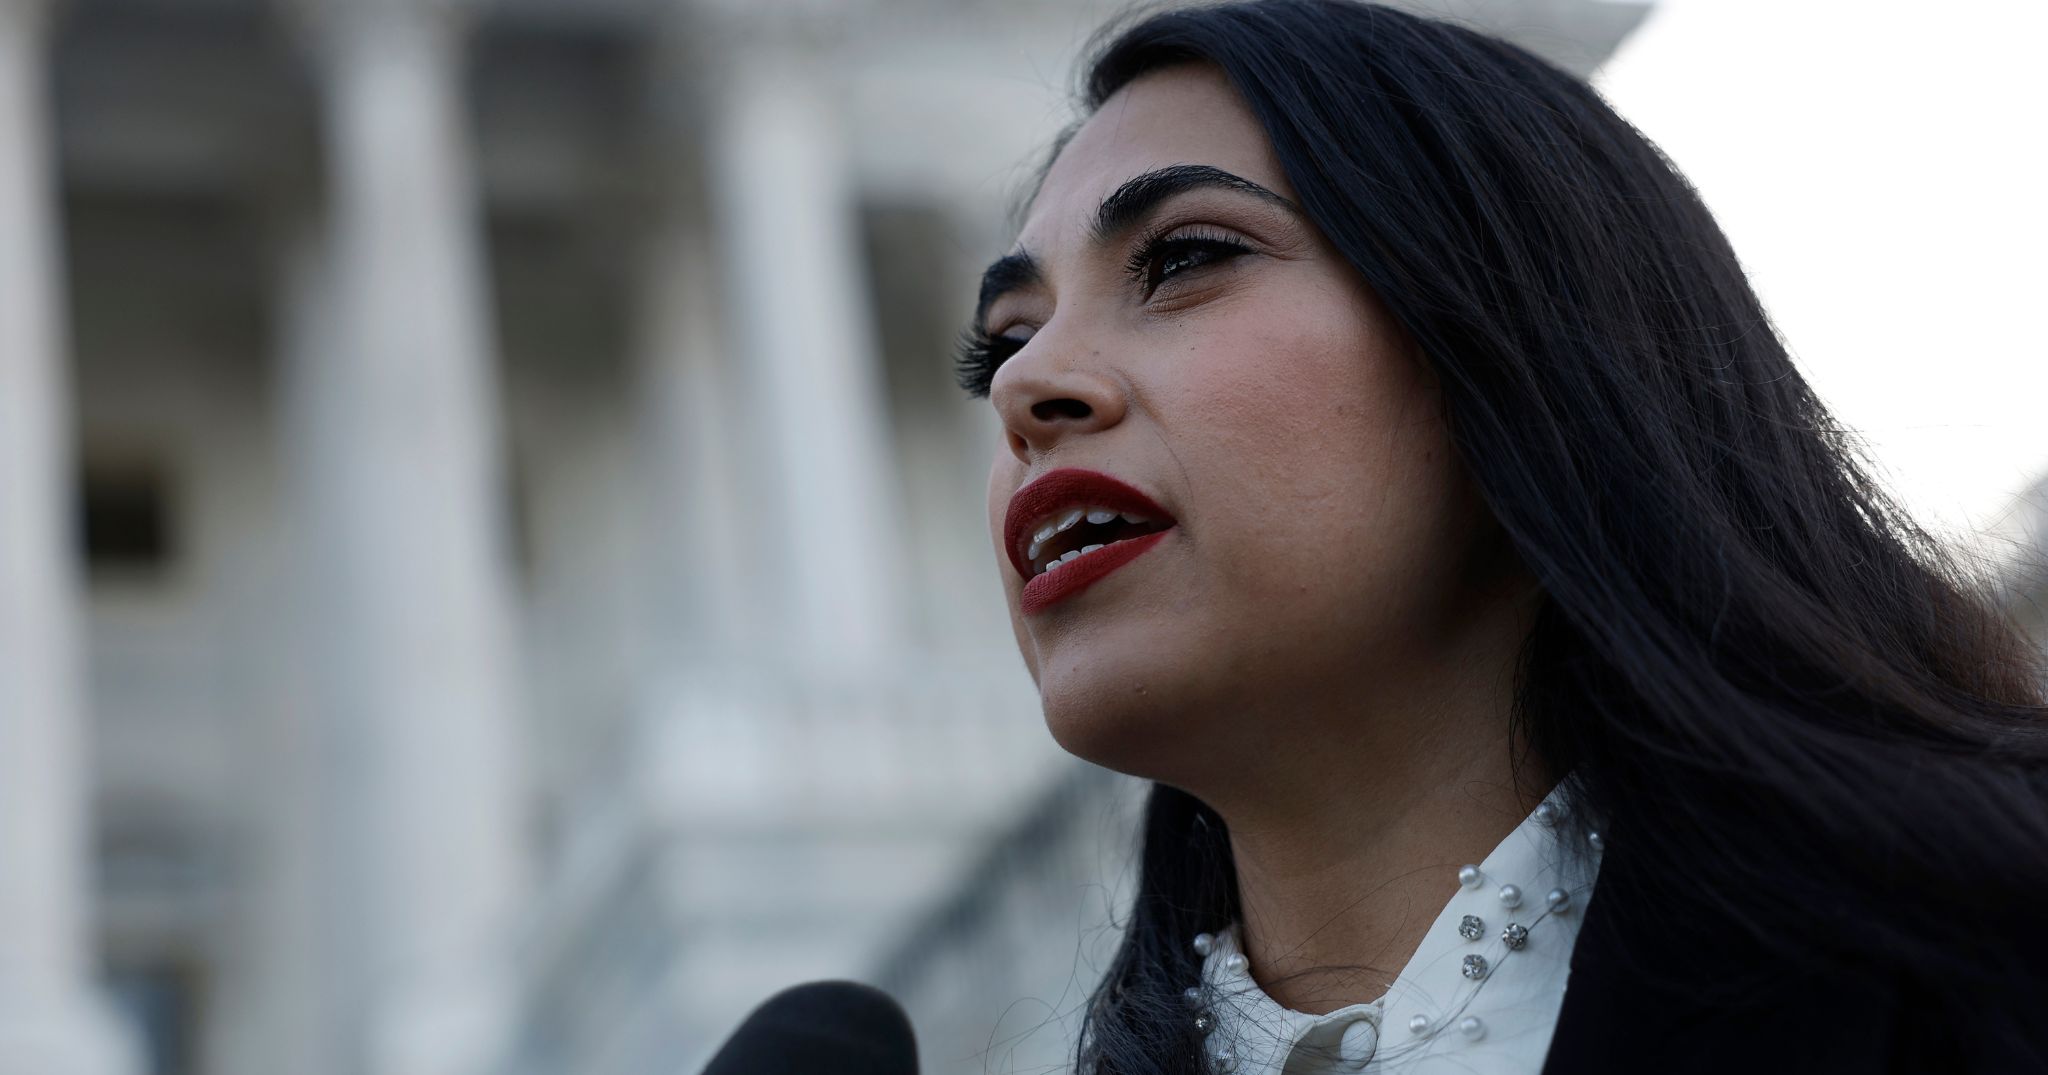 Republican Rep. Mayra Flores of Texas gives an interview outside the Capitol in Washington, D.C., after being sworn in on June 21.